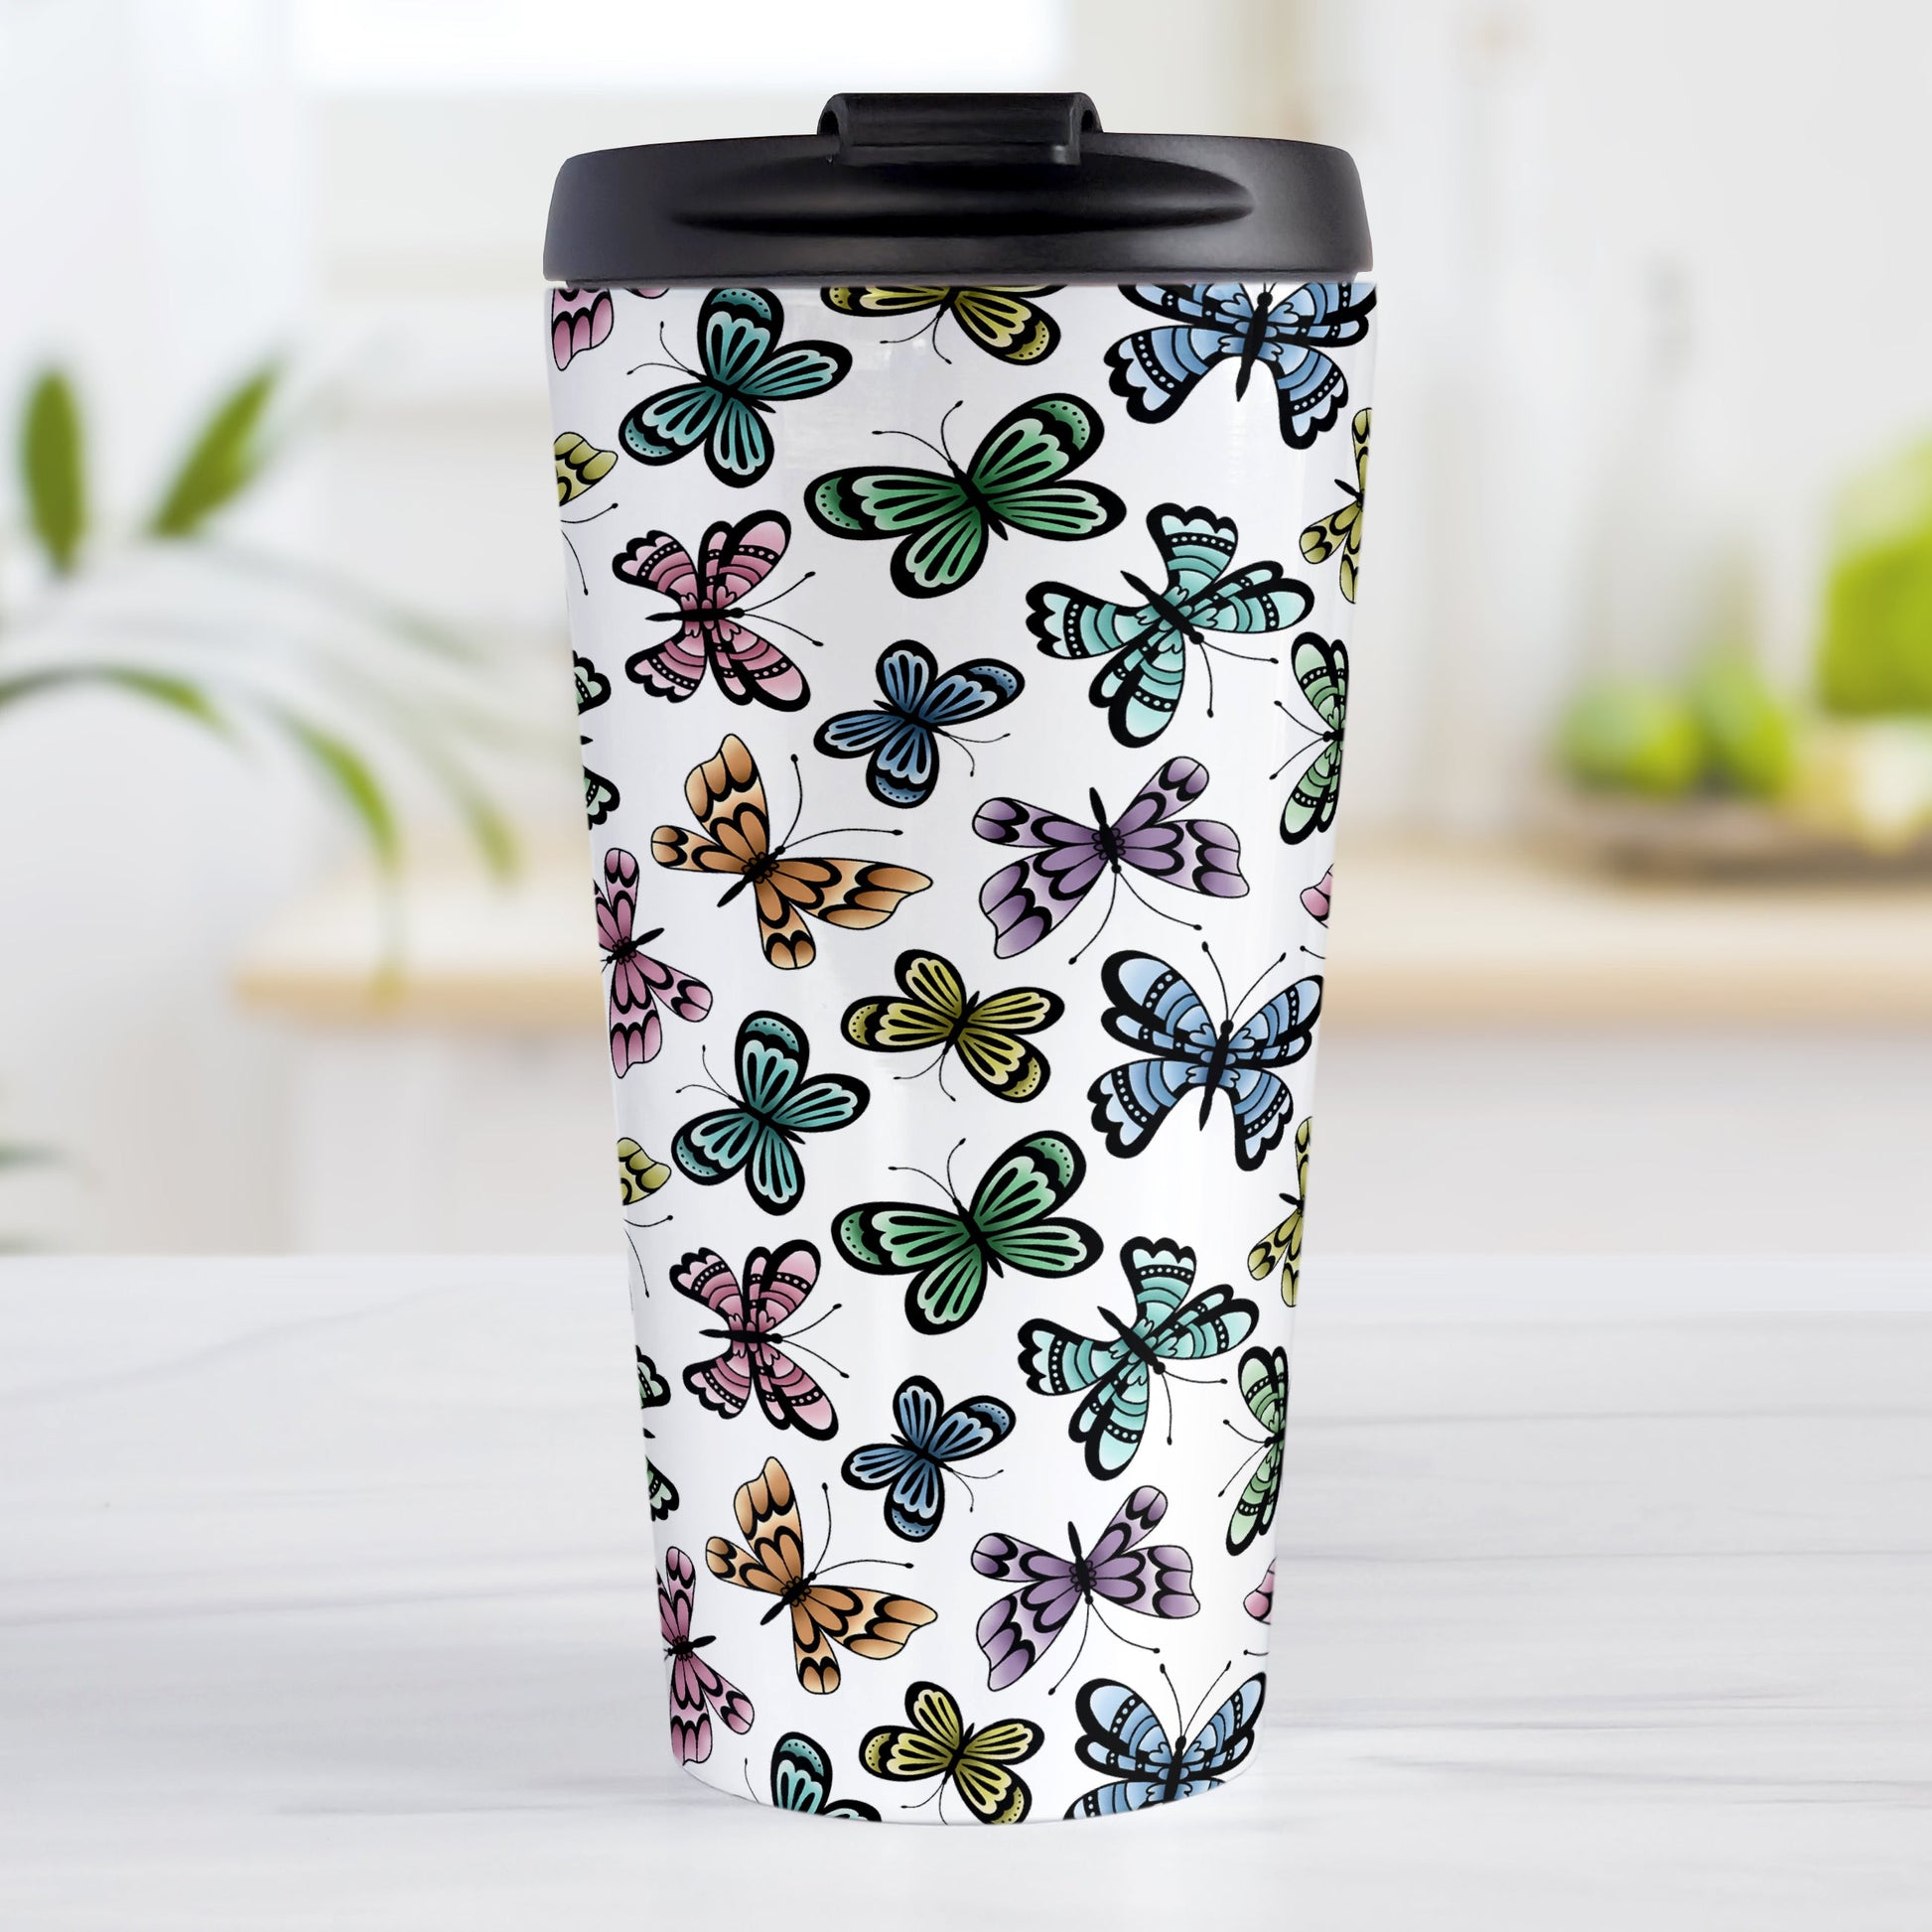 Pretty Butterfly Pattern Travel Mug (15oz) at Amy's Coffee Mugs. A stainless steel travel mug designed with pretty and colorful butterflies in a pattern that wraps around the mug. This travel mug is perfect for people who love butterflies and colorful nature designs. 